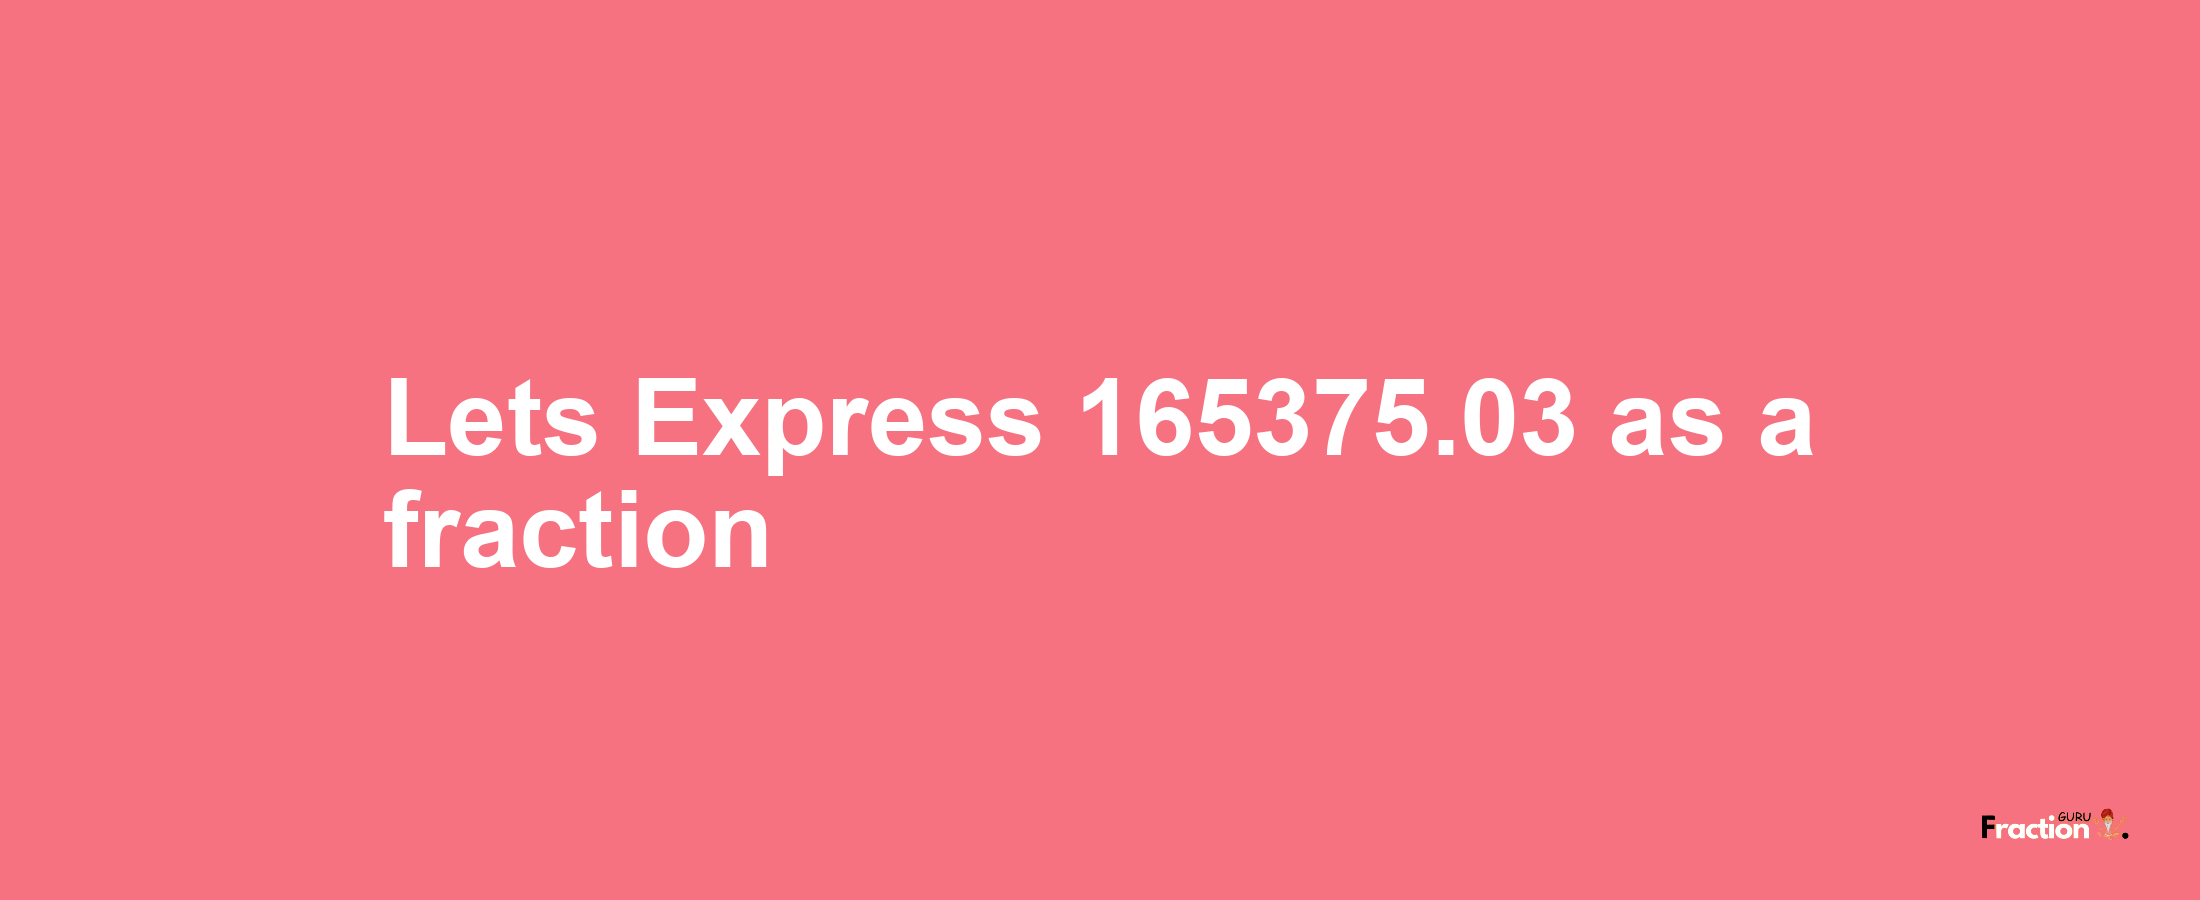 Lets Express 165375.03 as afraction